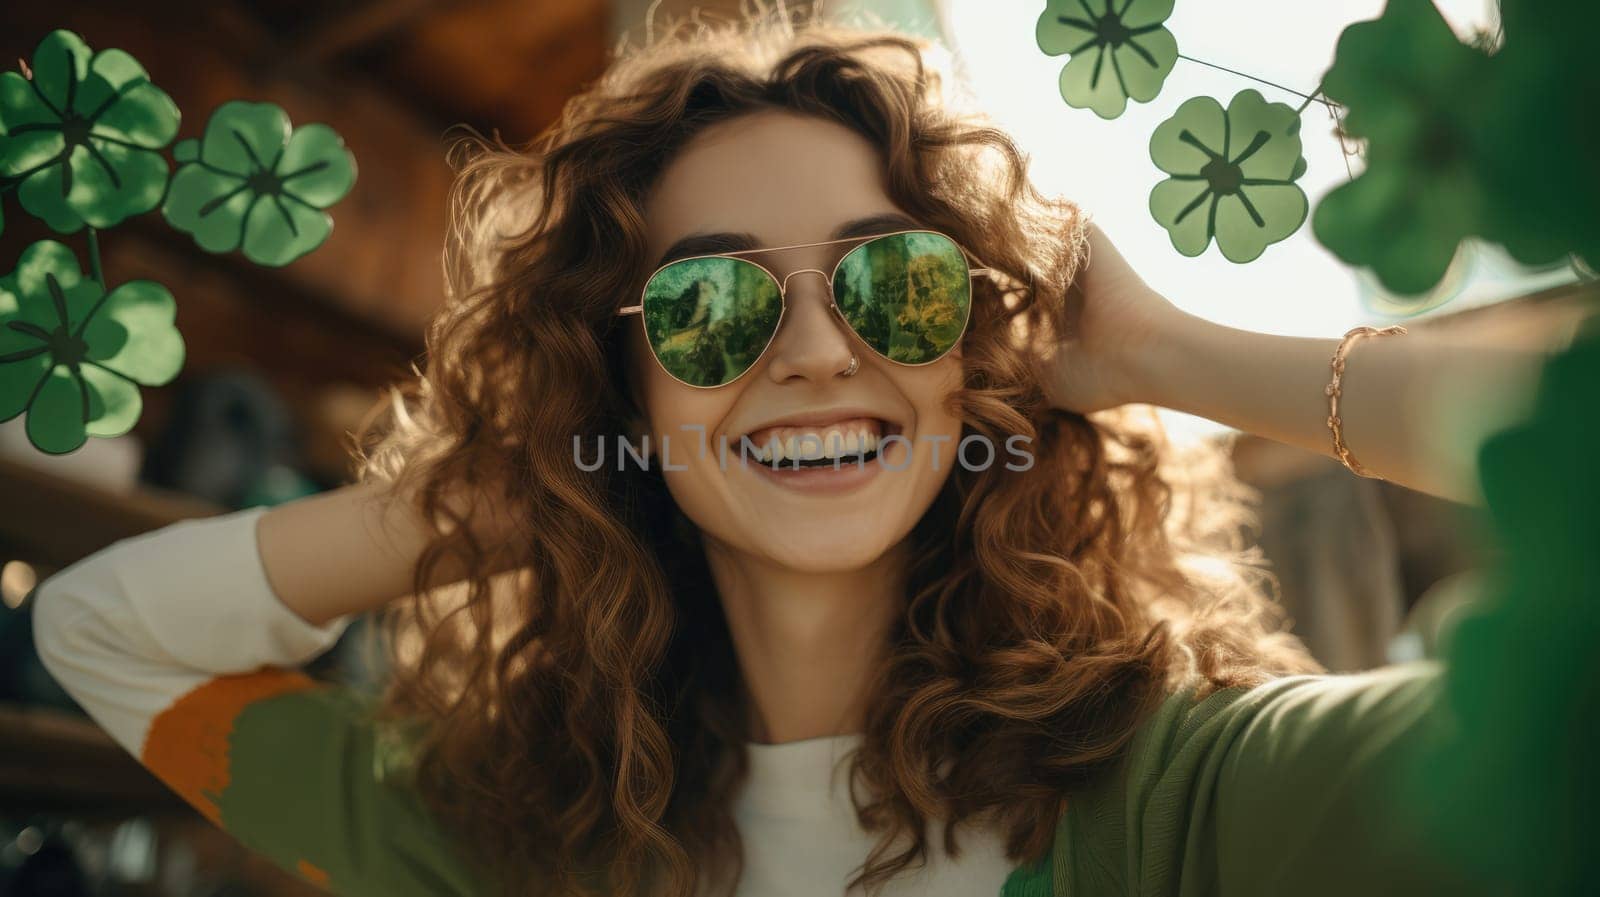 Close-up portrait of a young woman with brown hair, wearing stylish sunglasses. Her radiant smile exudes confidence and happiness as she poses in a studio setting against a vibrant green background.